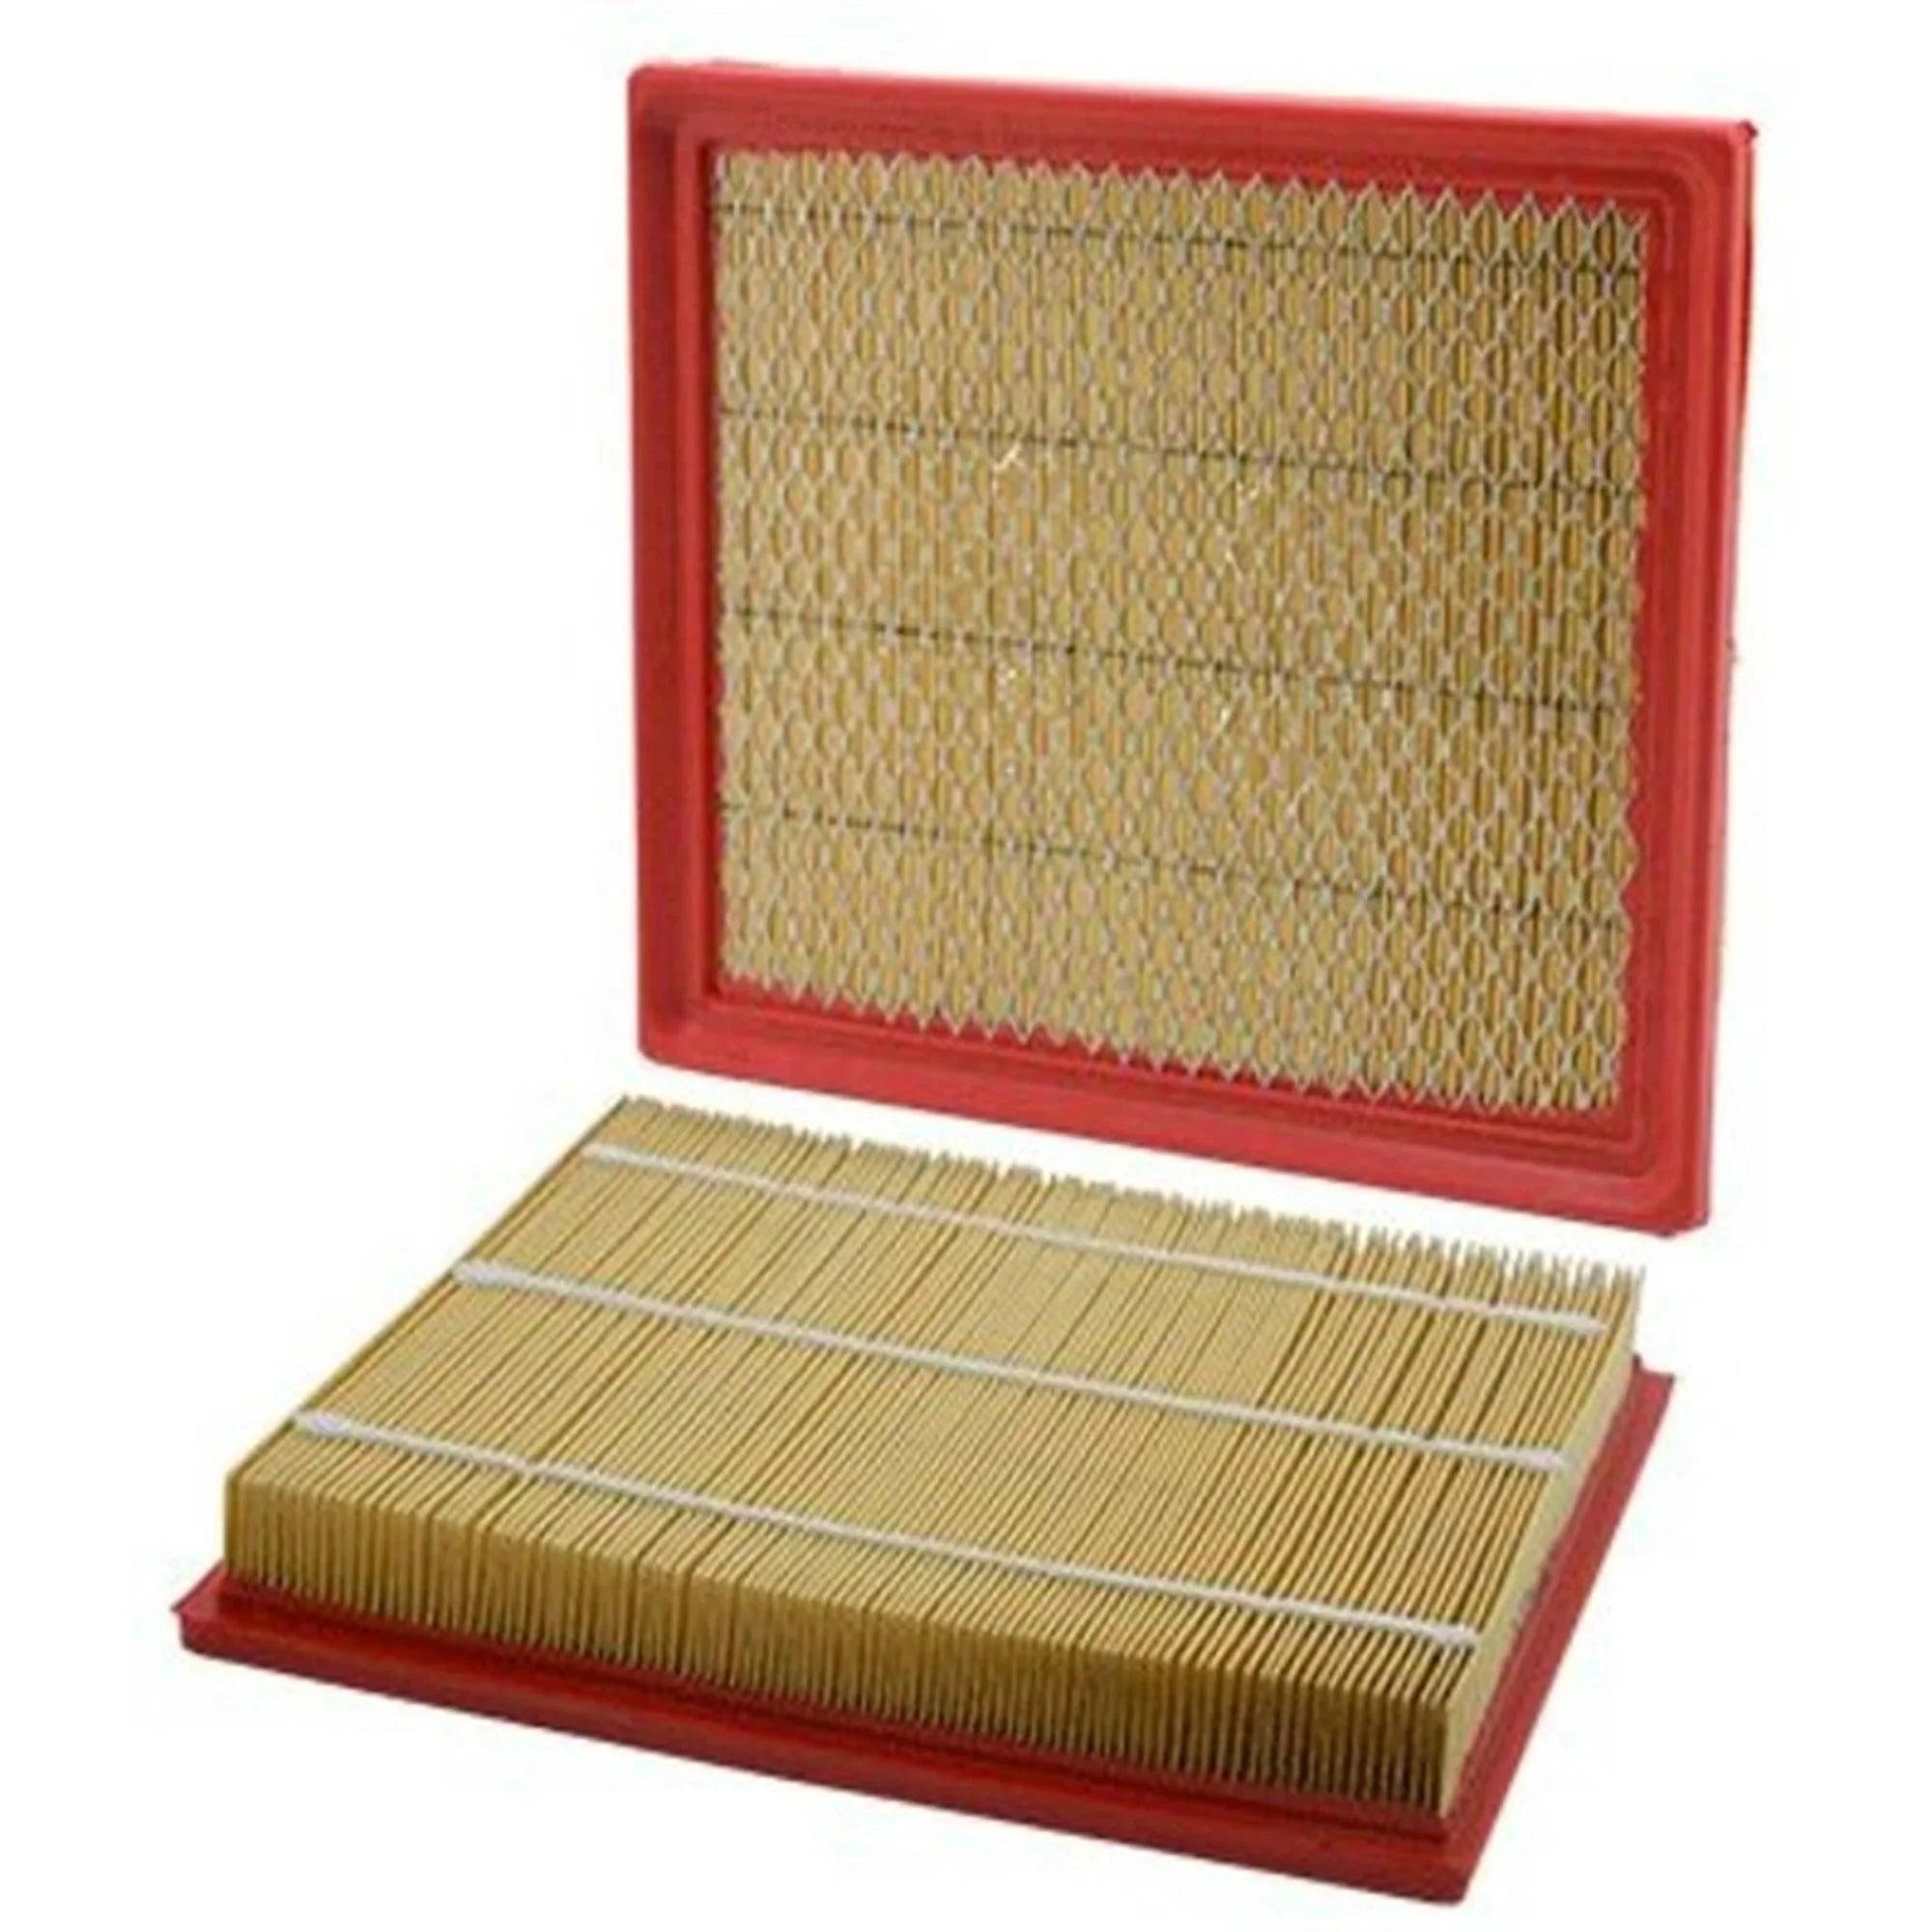 Wholesale prices with free shipping all over United States Air Filter - Steven Deals